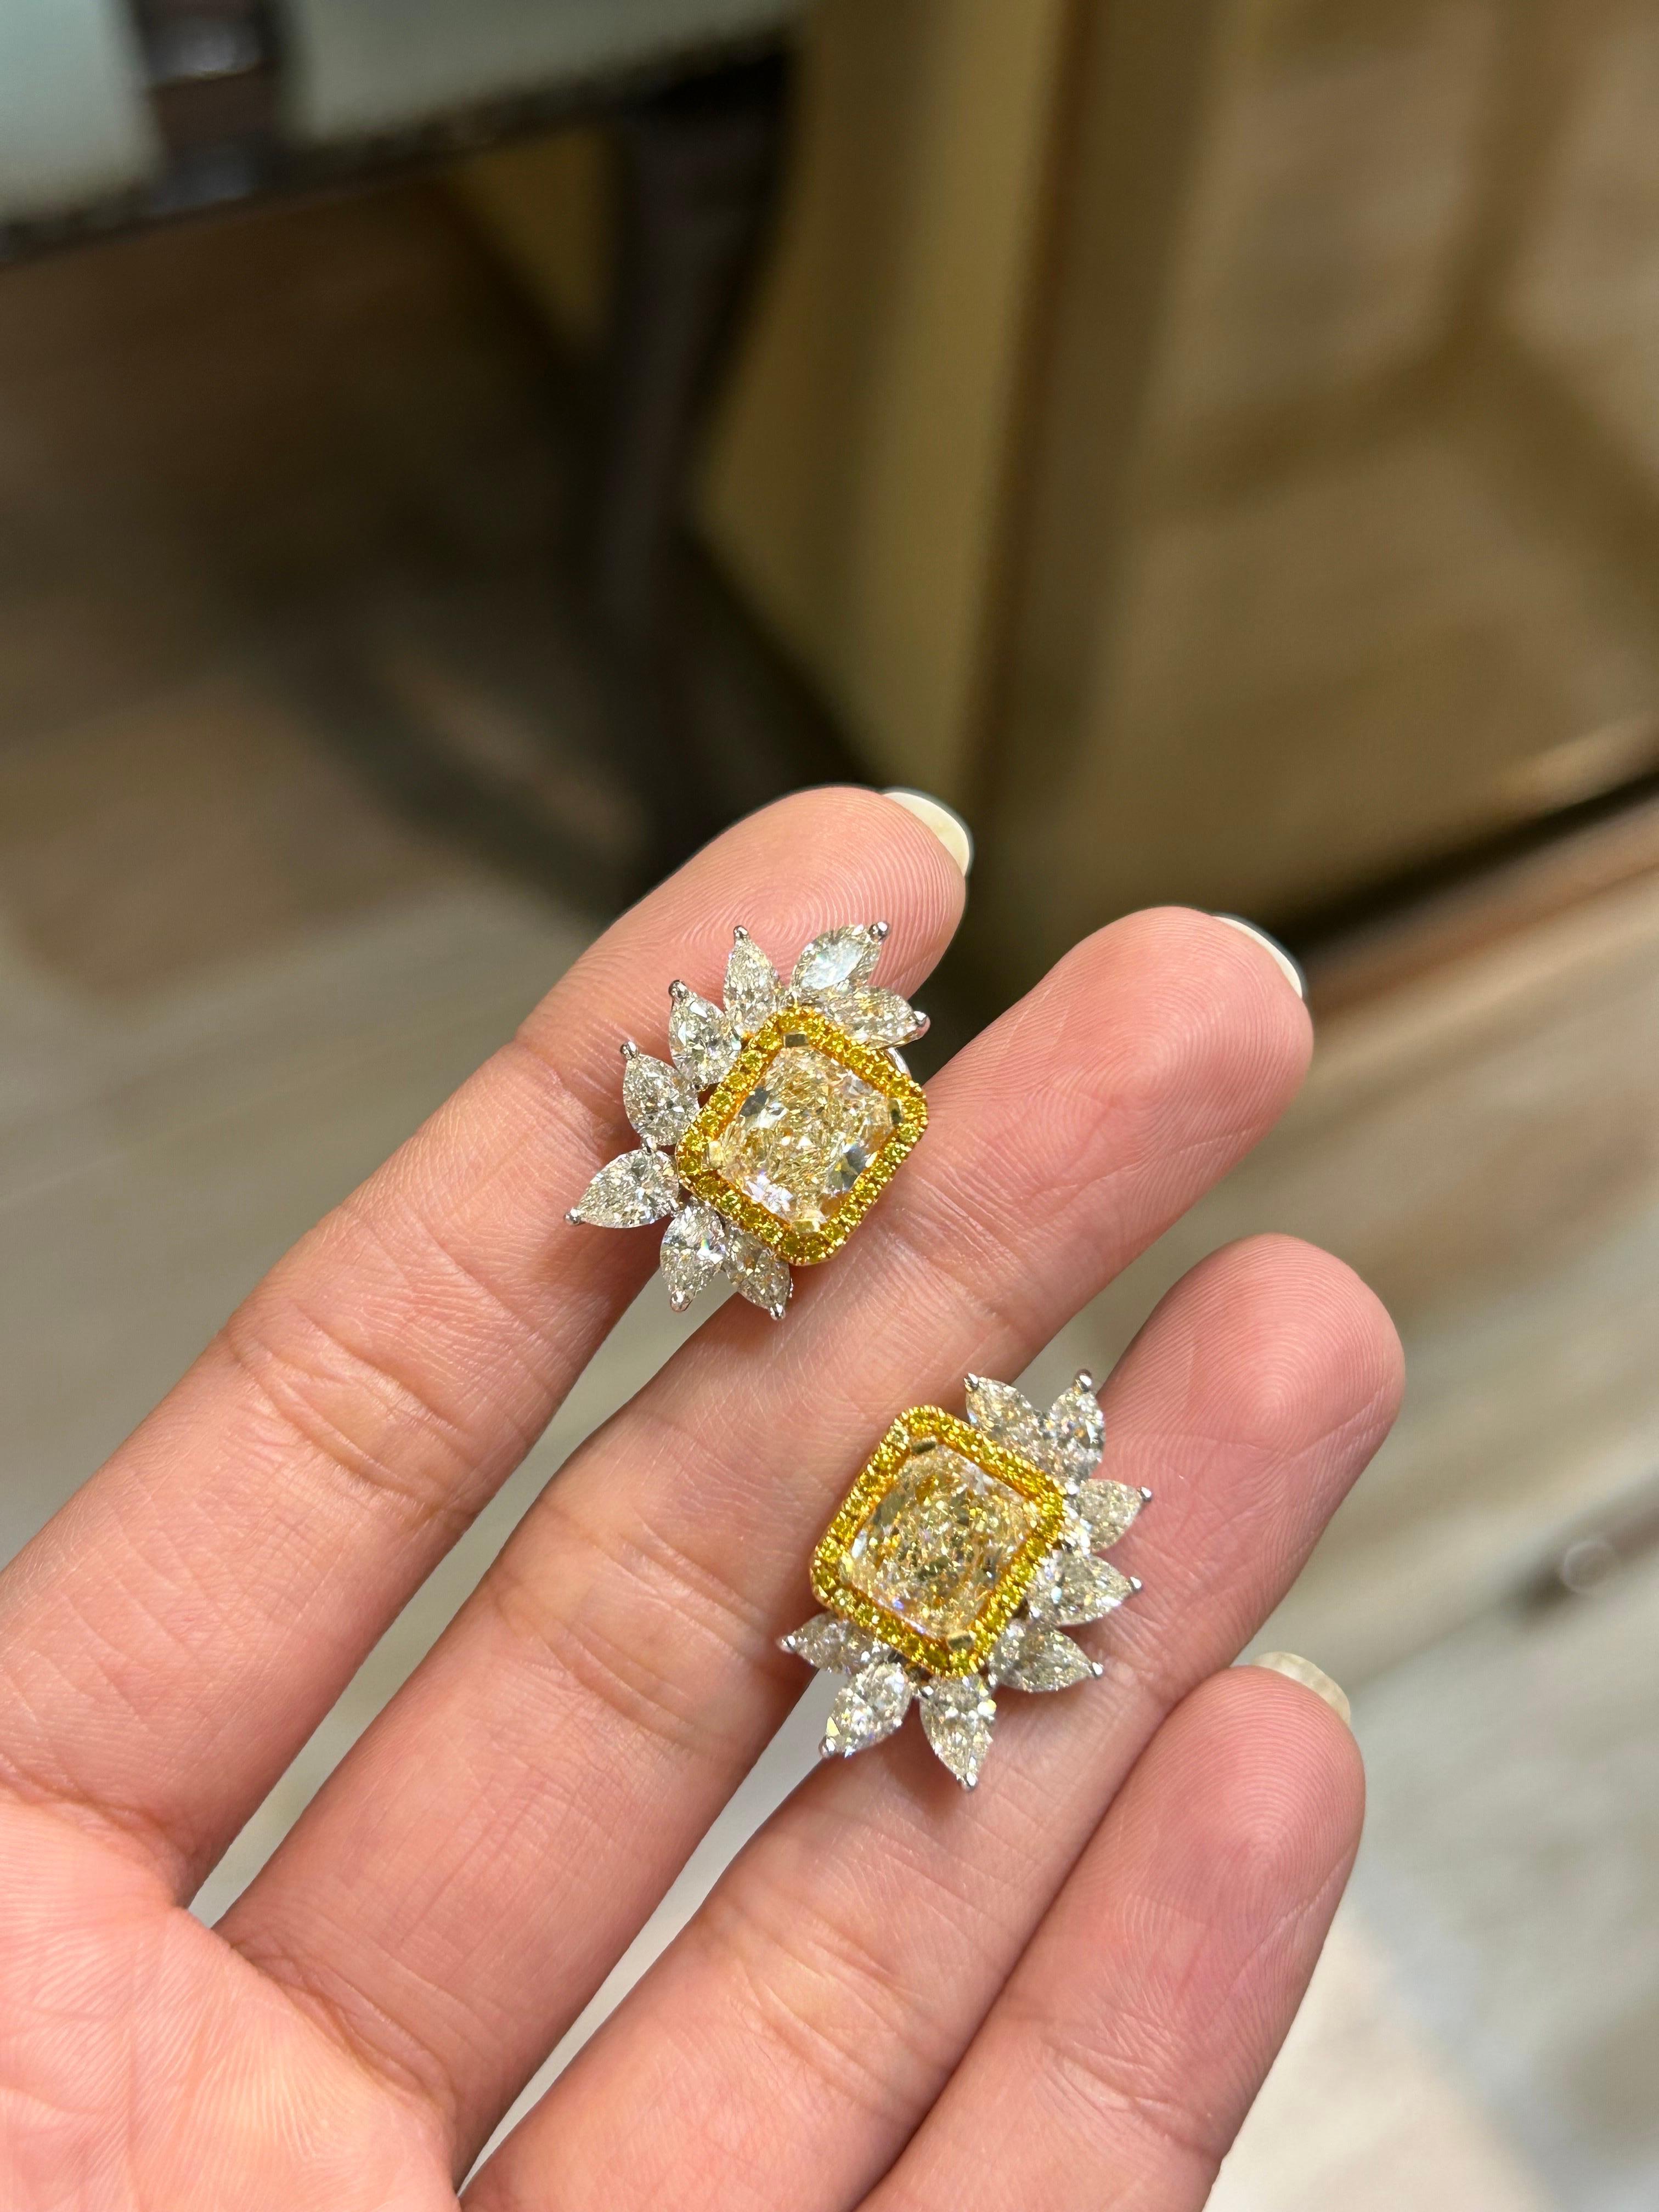 Make a statement with these 2.05 carat and 2.01 carat YZ color VVS/VS quality radiant cuts, with 0.39 carat yellow diamonds, 1.78 carat marquise diamonds, and 2.60 carat pear shape diamonds. Comes with an omega, lever backing. All set in 18K gold. 